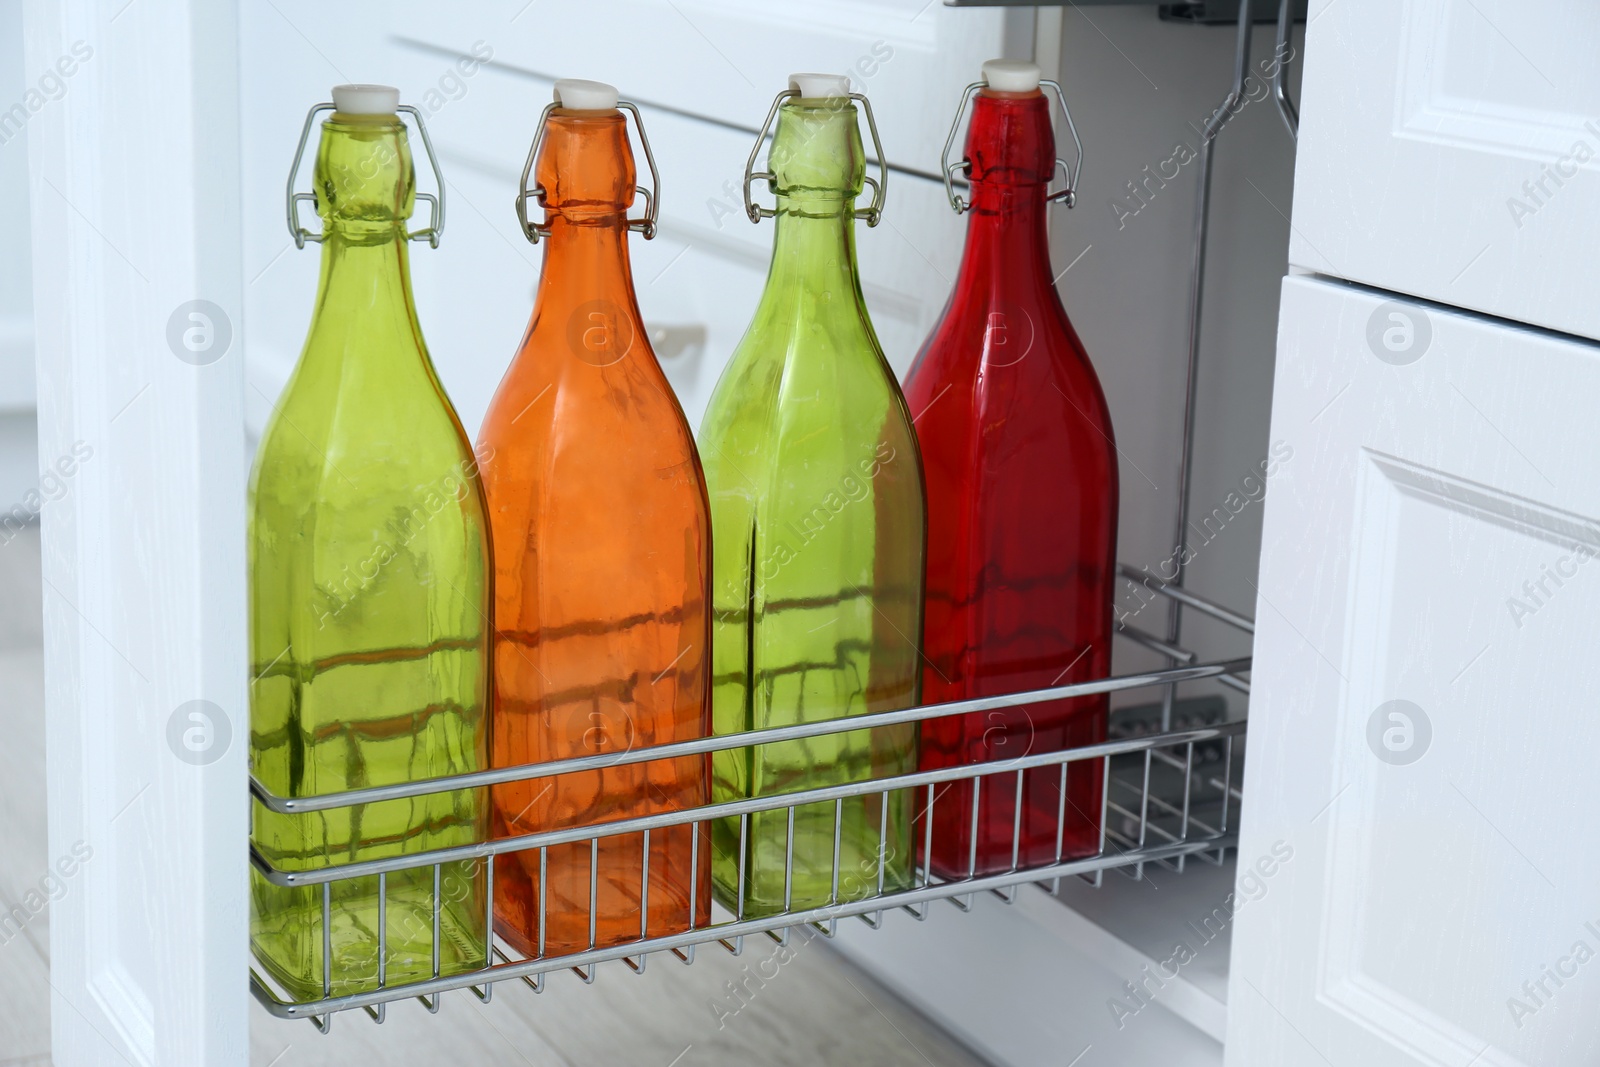 Photo of Shelf with different bottles indoors. Order in kitchen